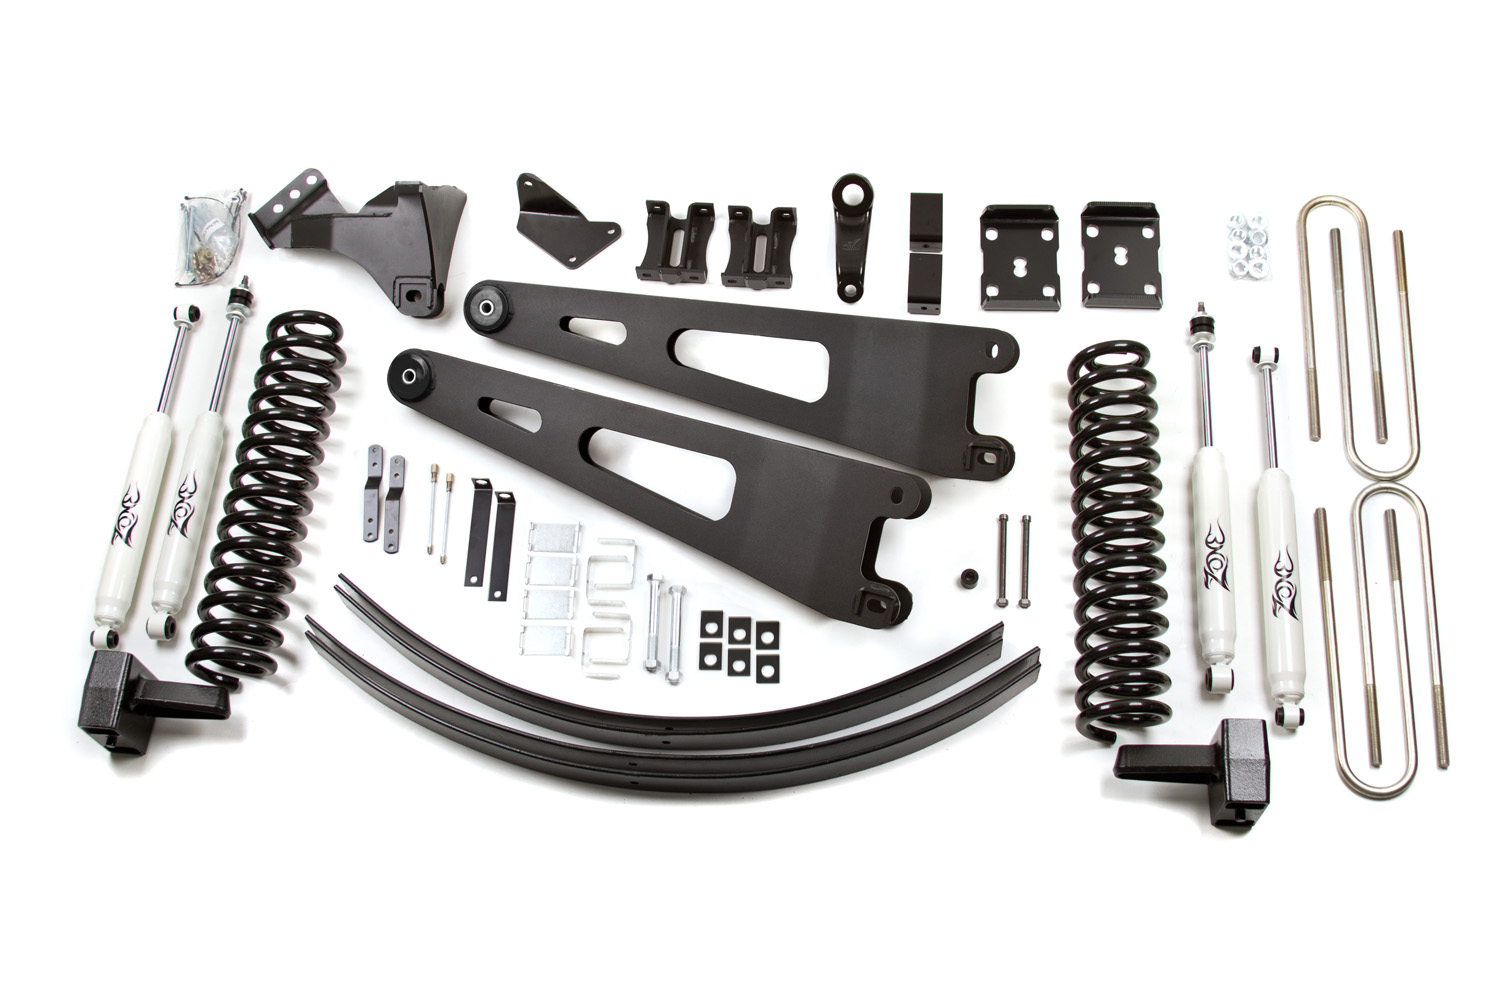 Full Lift Kit for 2008-2020 Ford F250 F350 Super Duty 3 Front Lift Coil Spring Spacers 2 Rear Lift Blocks Black Supreme Suspensions Shock Extenders Sway Bar Drop Brackets